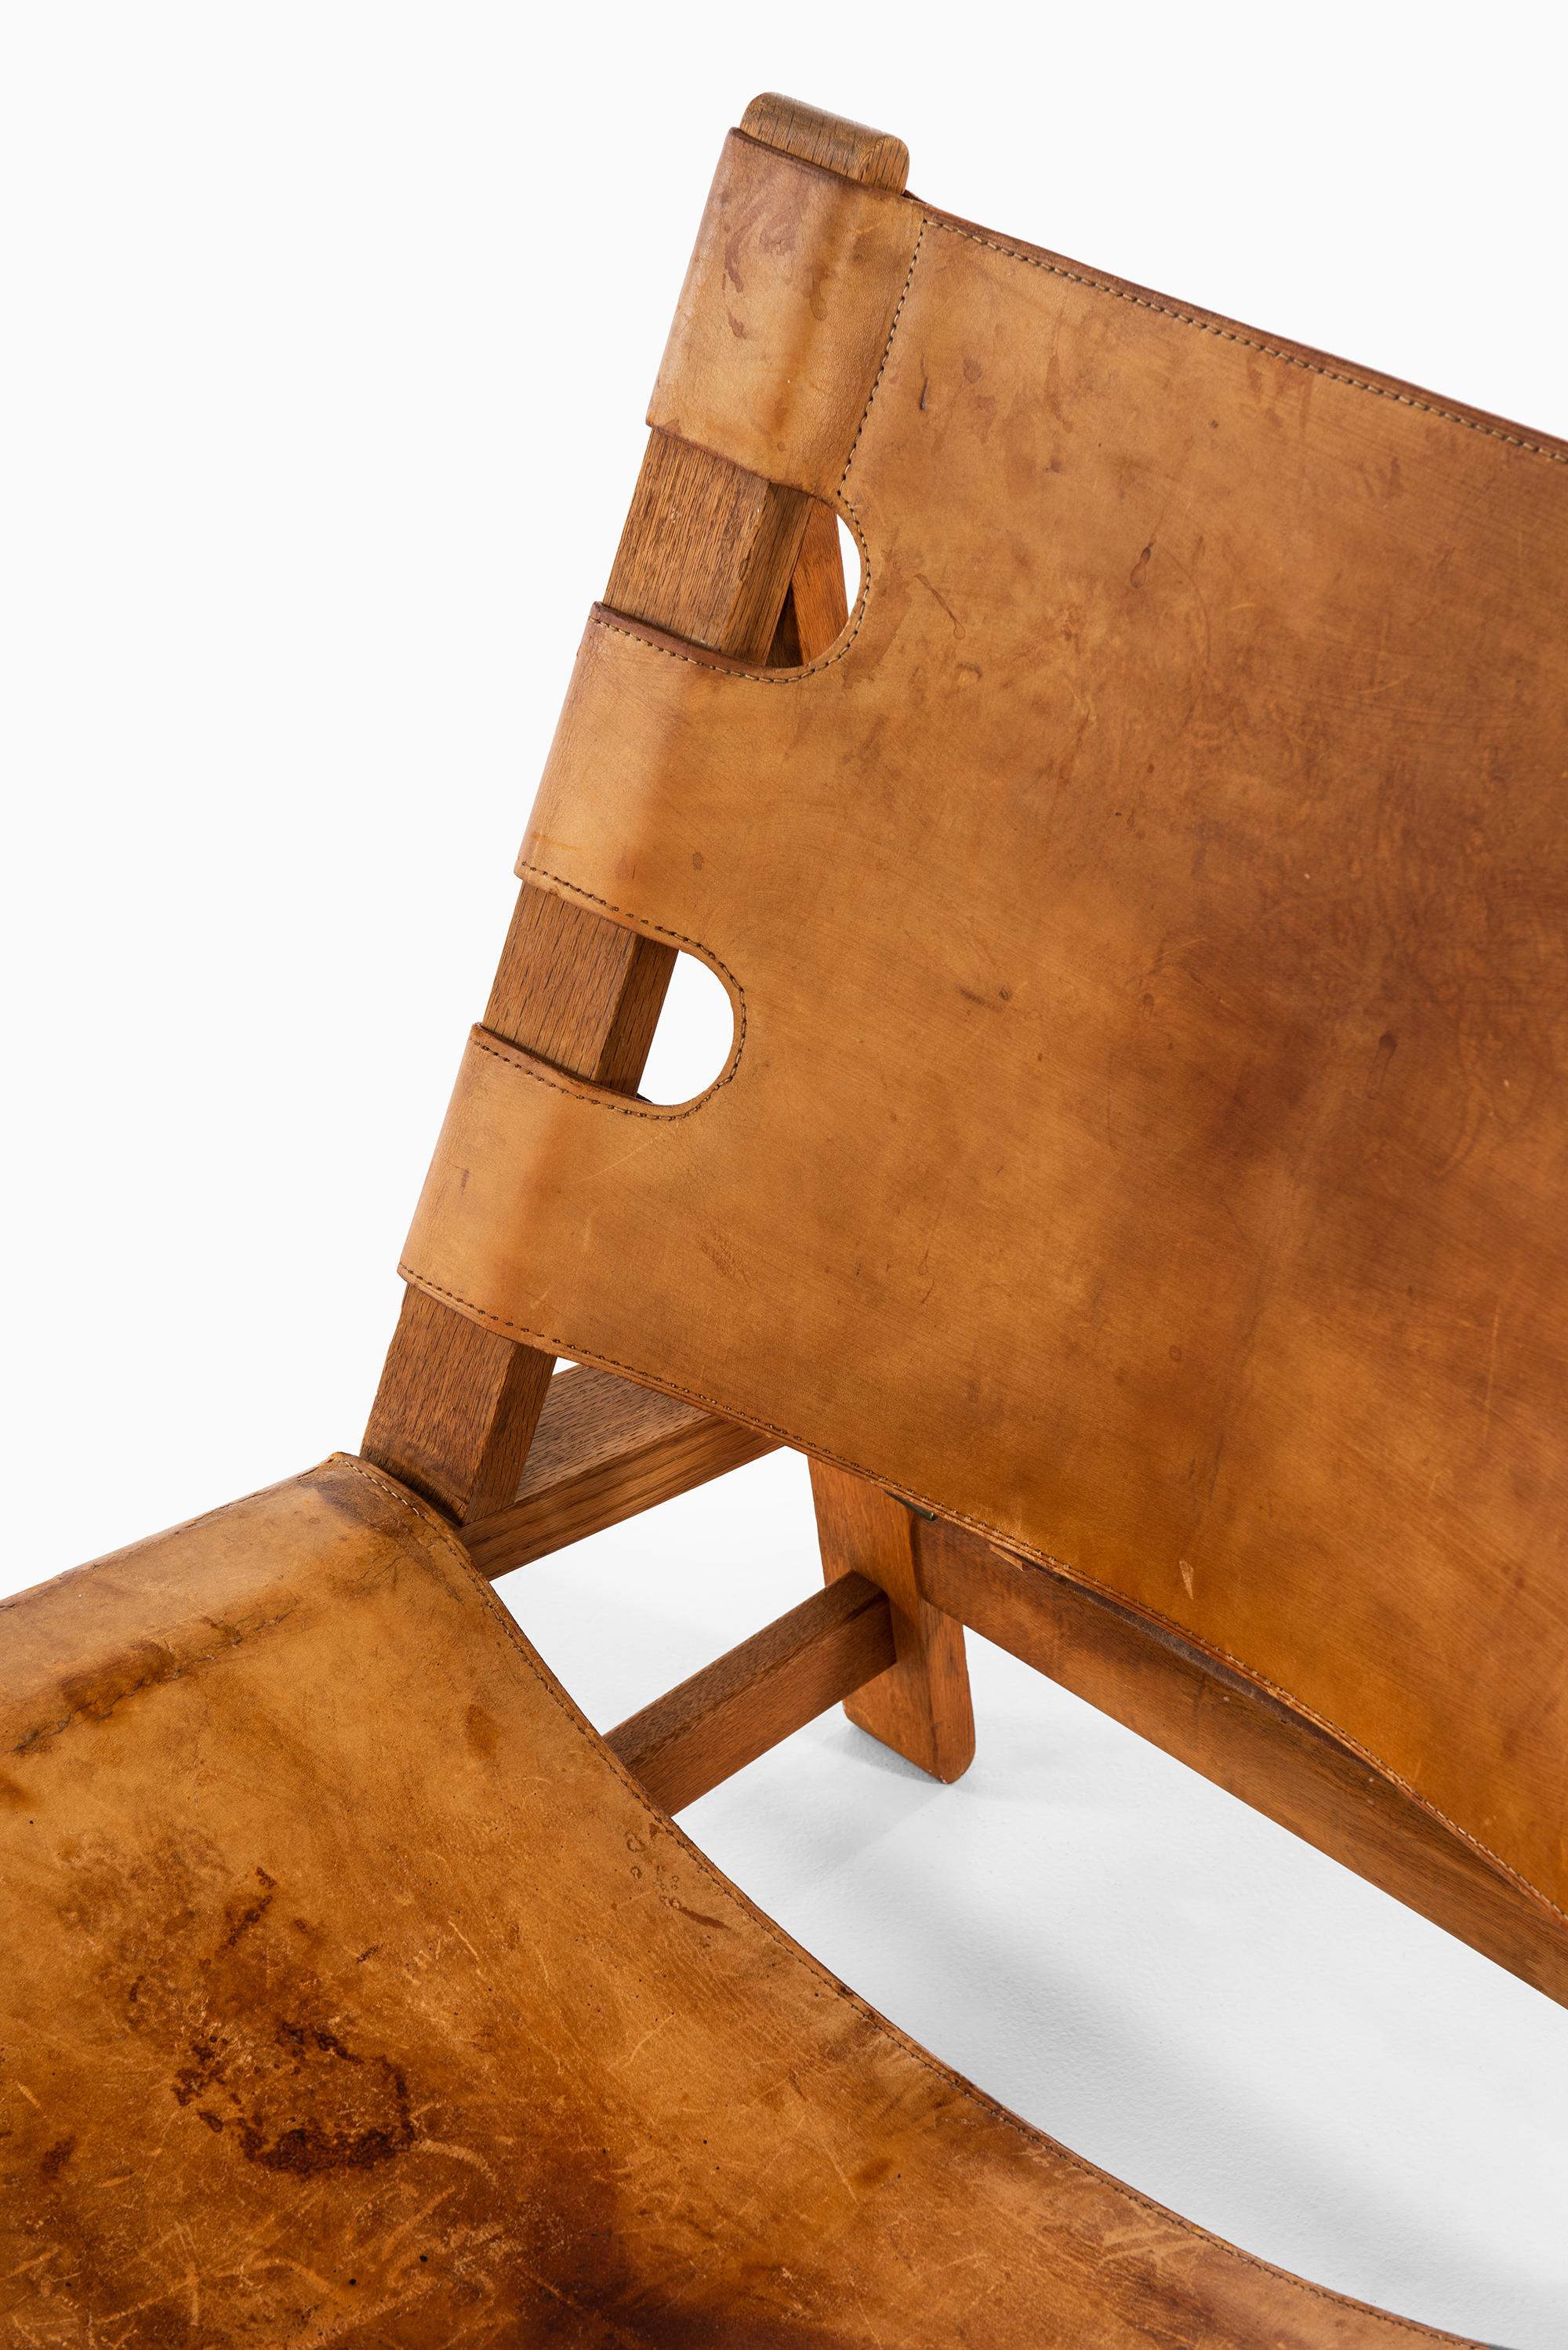 Rare hunting easy chair model 2224 designed by Børge Mogensen. Produced by Fredericia Stolefabrik in Denmark.